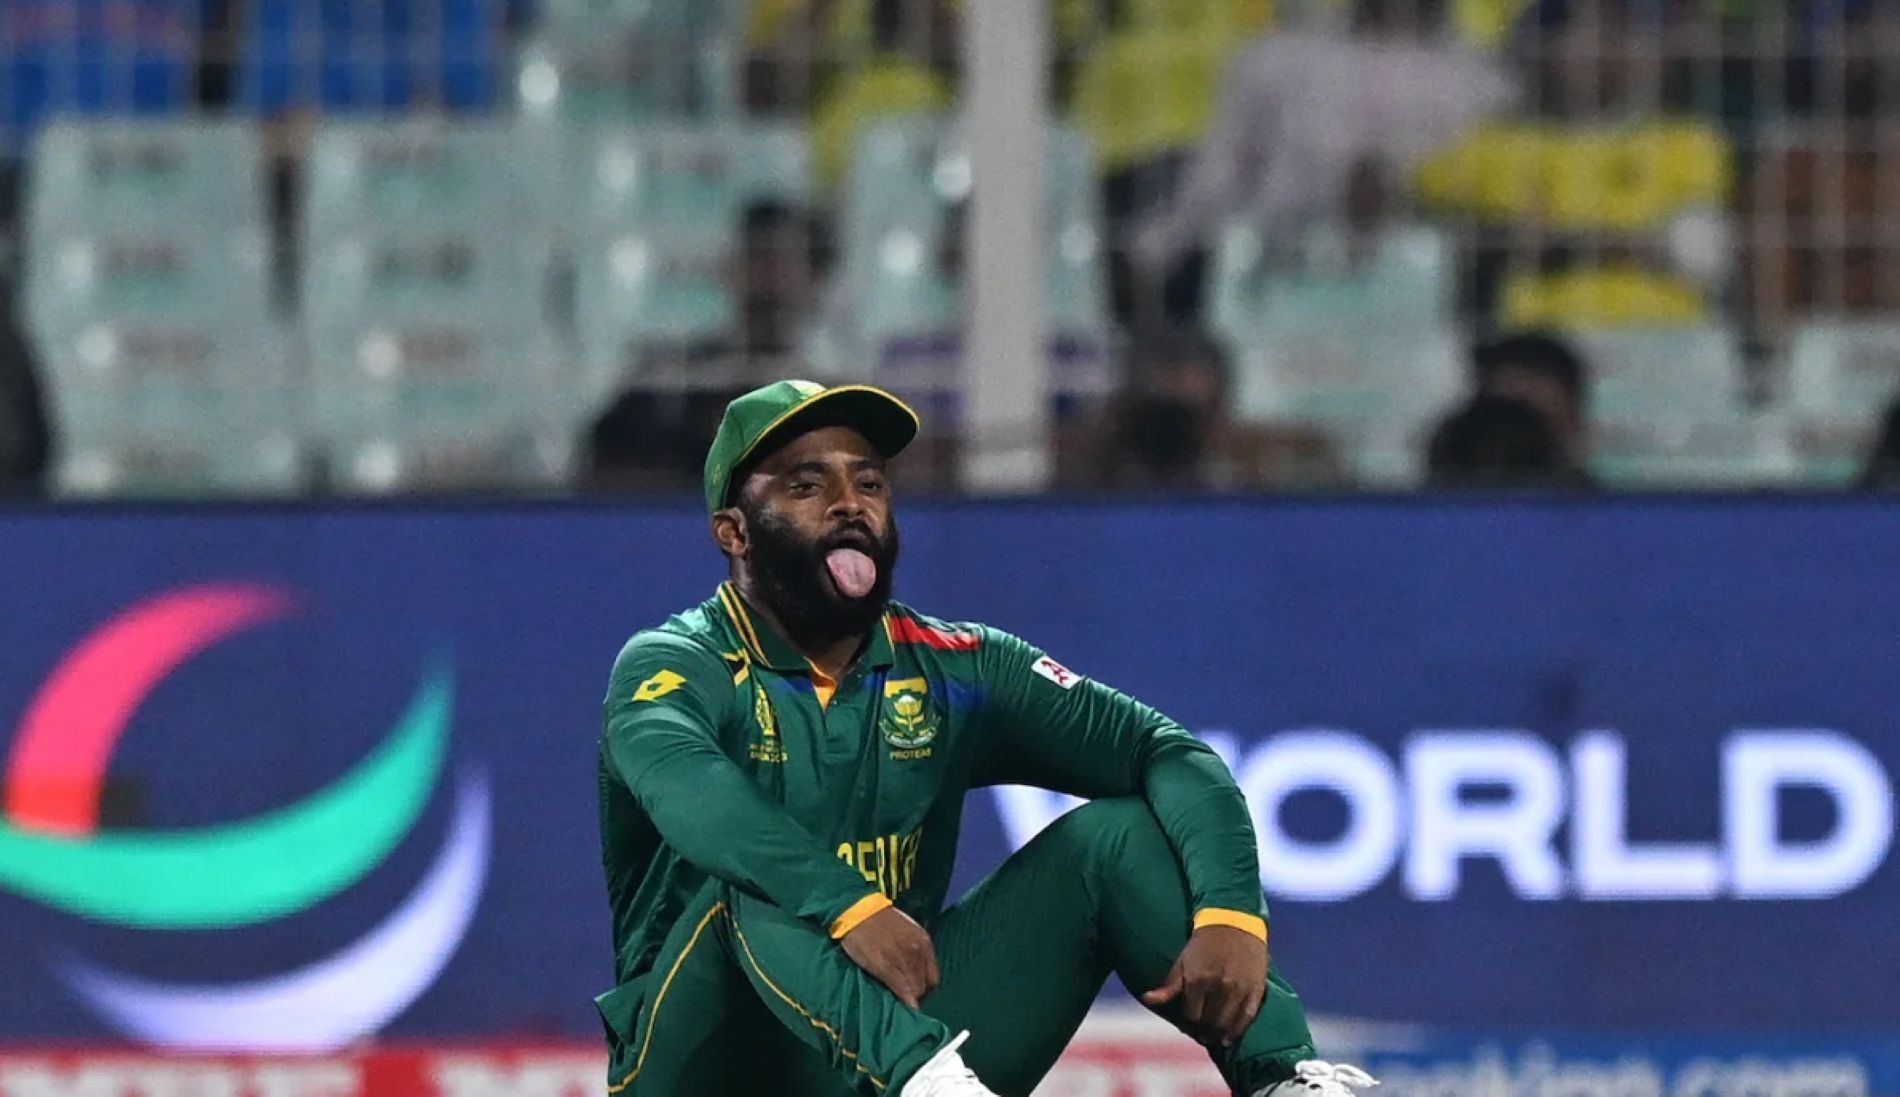 Temba Bavuma was criticized for playing in the semi-final despite not being 100% fit.